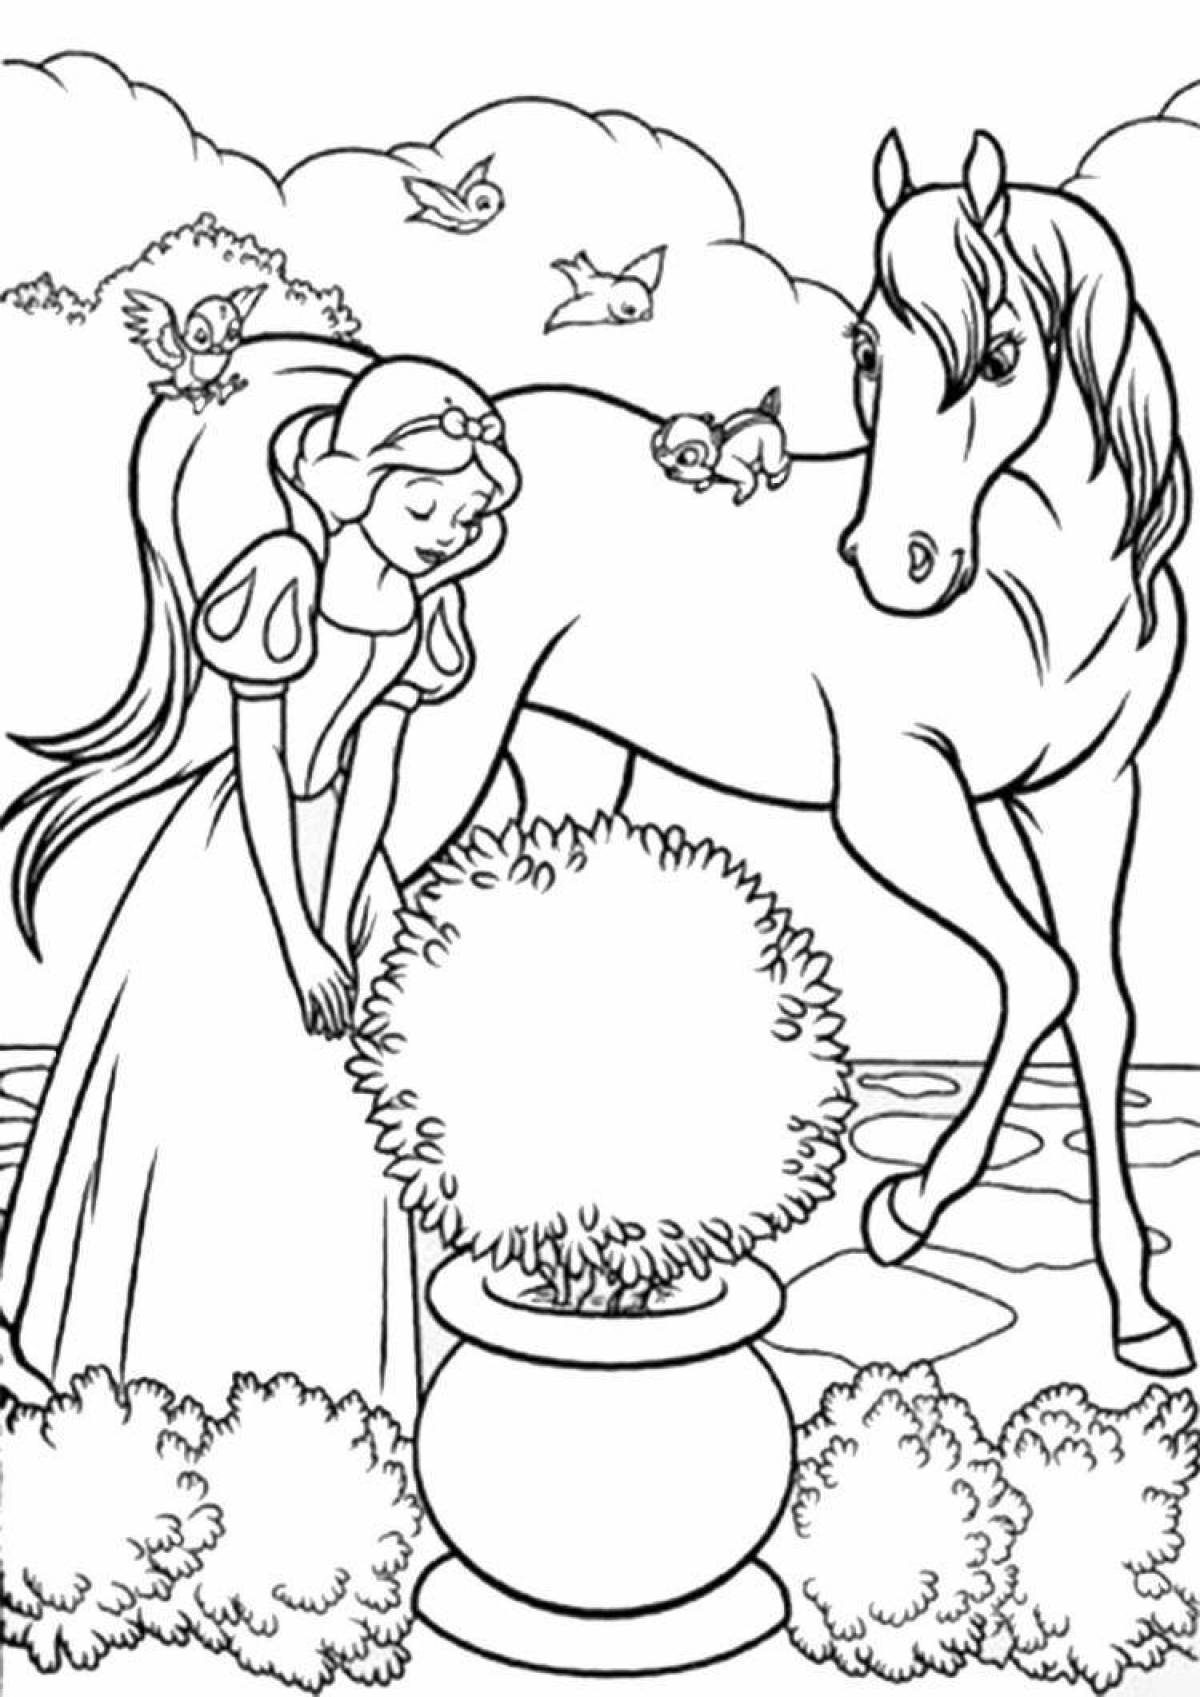 Coloring page joyful barbie on a horse